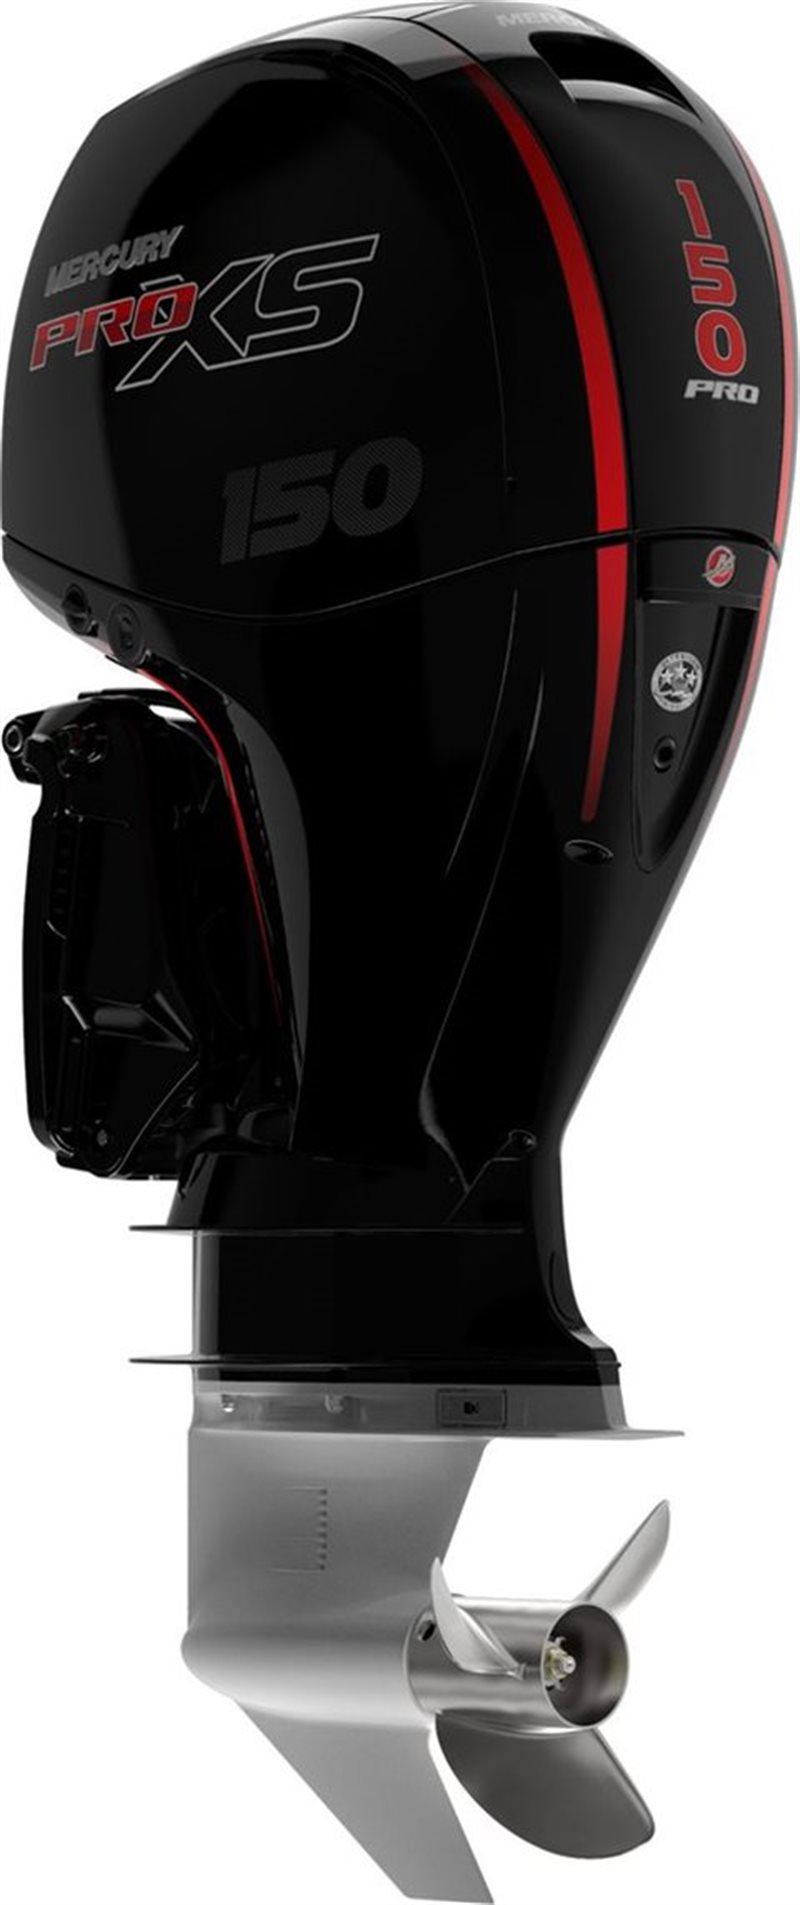 2020 Mercury Outboard 150 Pro XS at Fort Fremont Marine